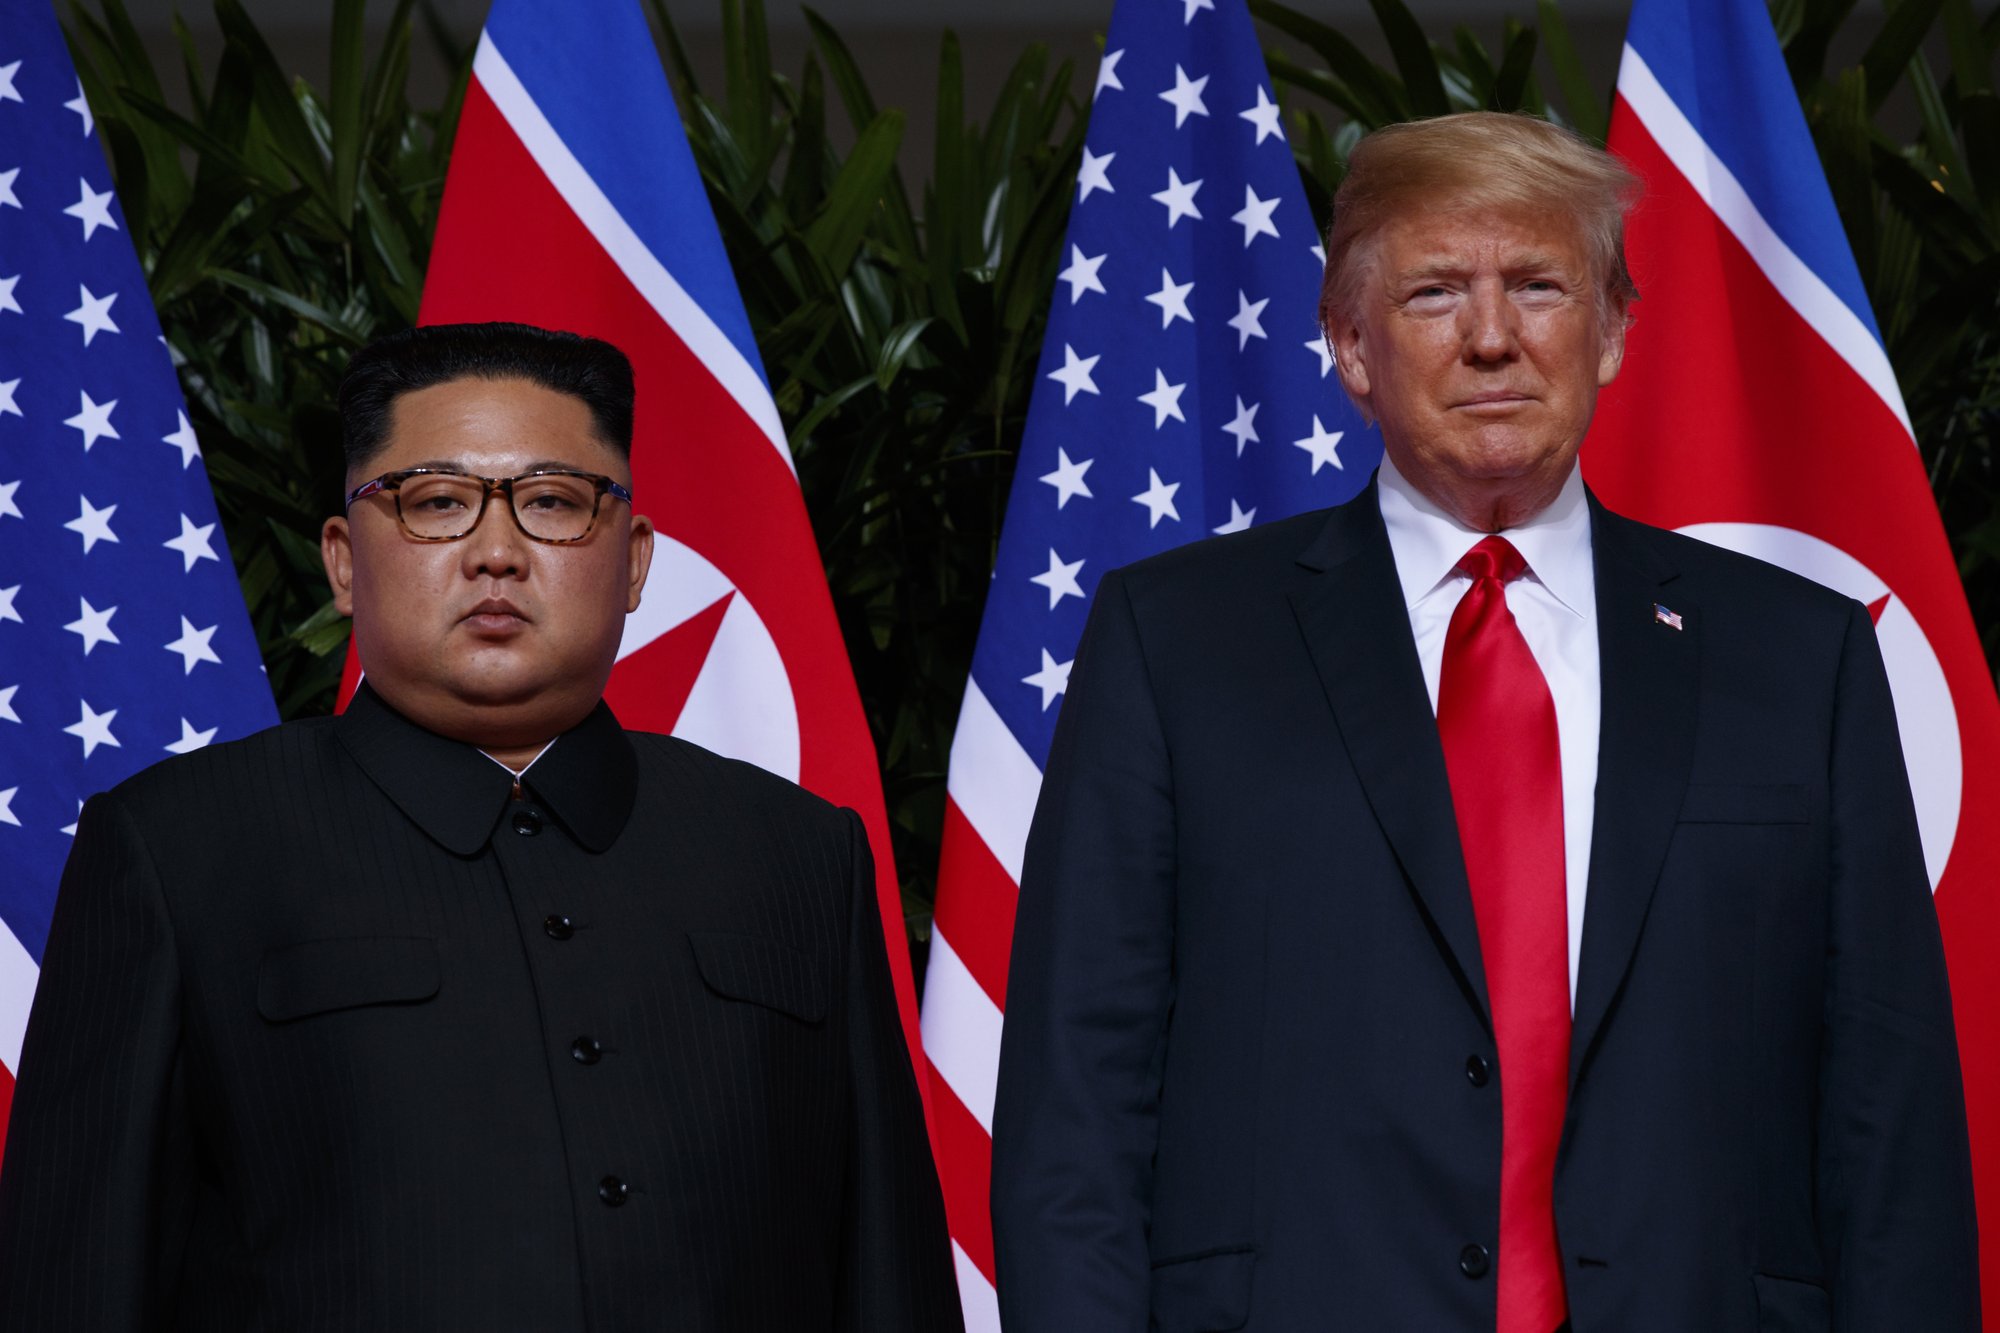 In this June 12, 2018, photo, U.S. President Donald Trump stands with North Korean leader Kim Jong Un during a meeting on Sentosa Island, in Singapore. For some observers, the nightmare result of the second summit between Trump and Kim is an ill-considered deal that allows North Korea to get everything it wants while giving up very little, even as the mercurial leaders trumpet a blockbuster nuclear success. (AP Photo/Evan Vucci)